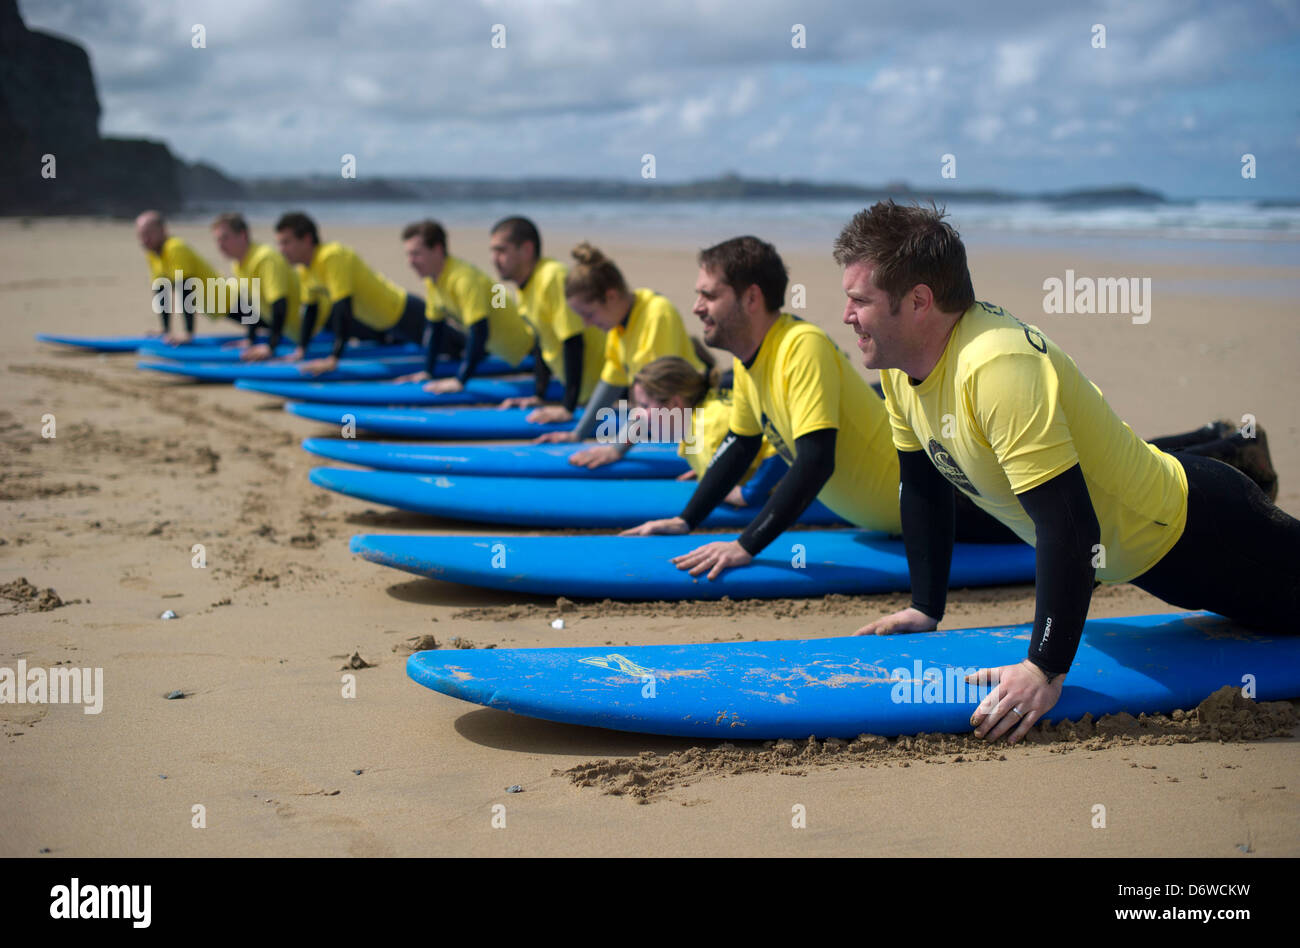 Students during a surf lesson on the beach at Watergate Bay, Cornwall, UK Stock Photo